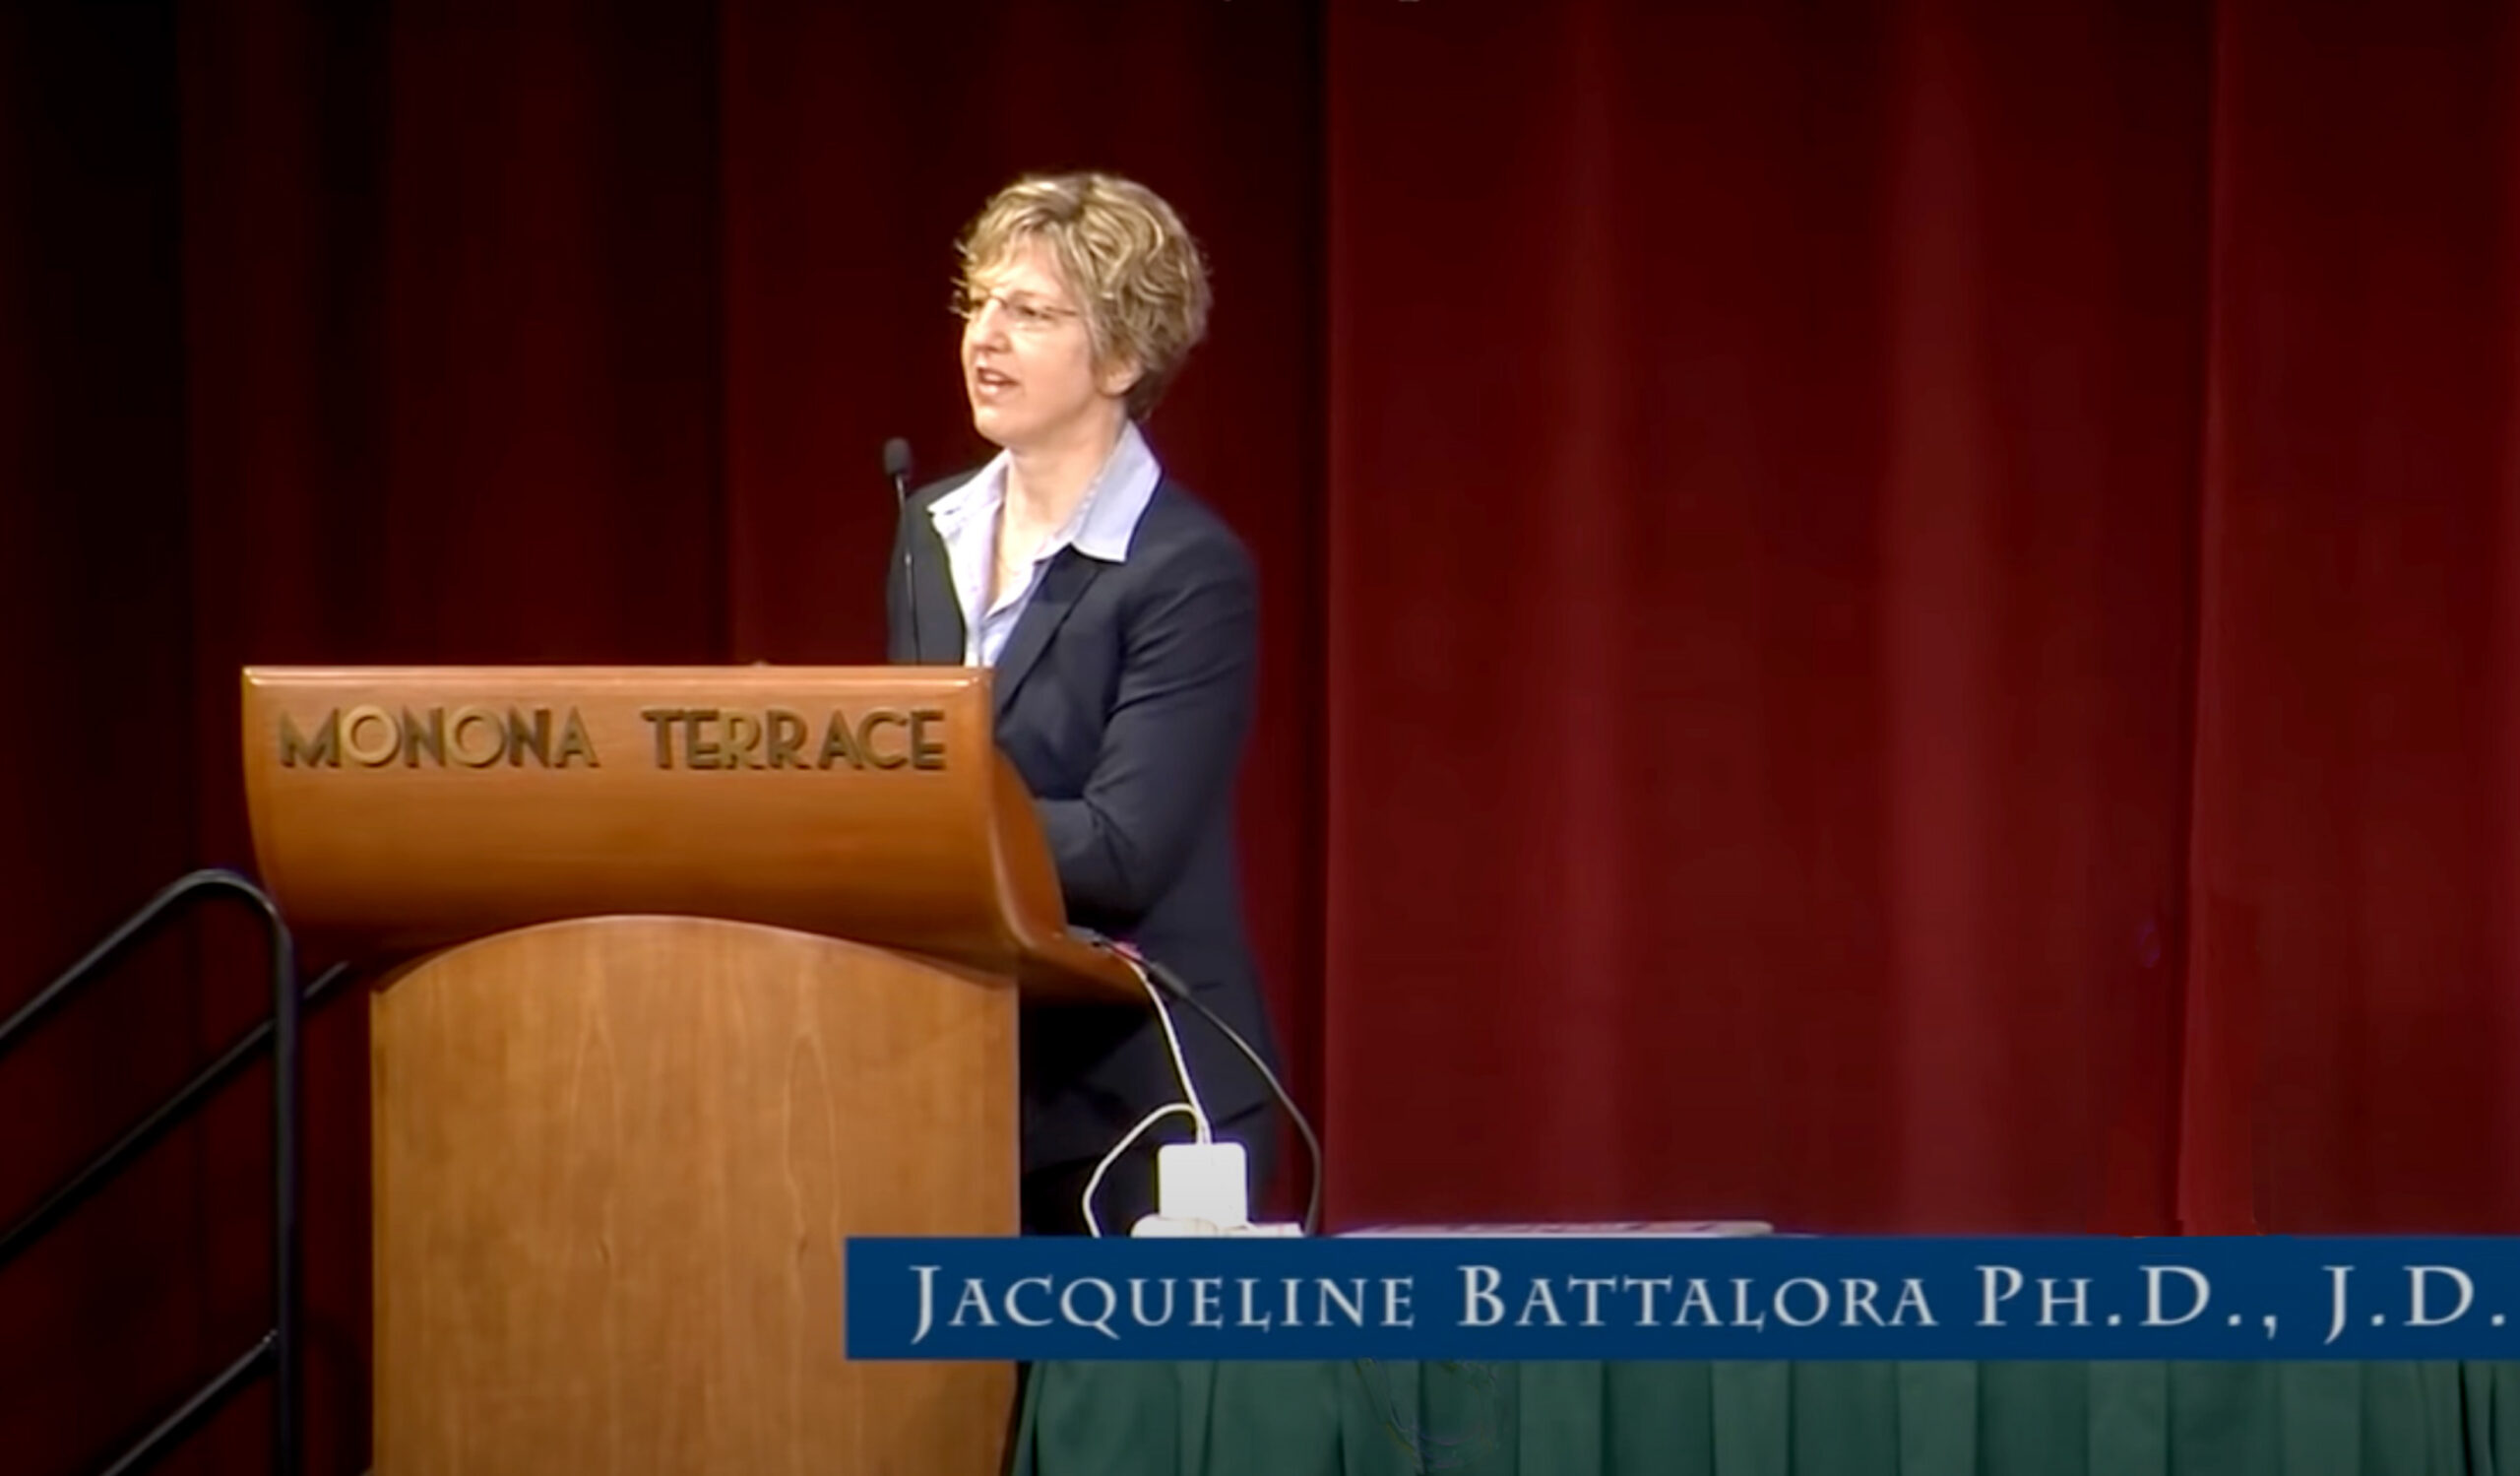 Photo captipned Jacqueline Battalora PH.D., J.D., white, blond haired woman with white button up shirt and grey suit speaking before a podium.